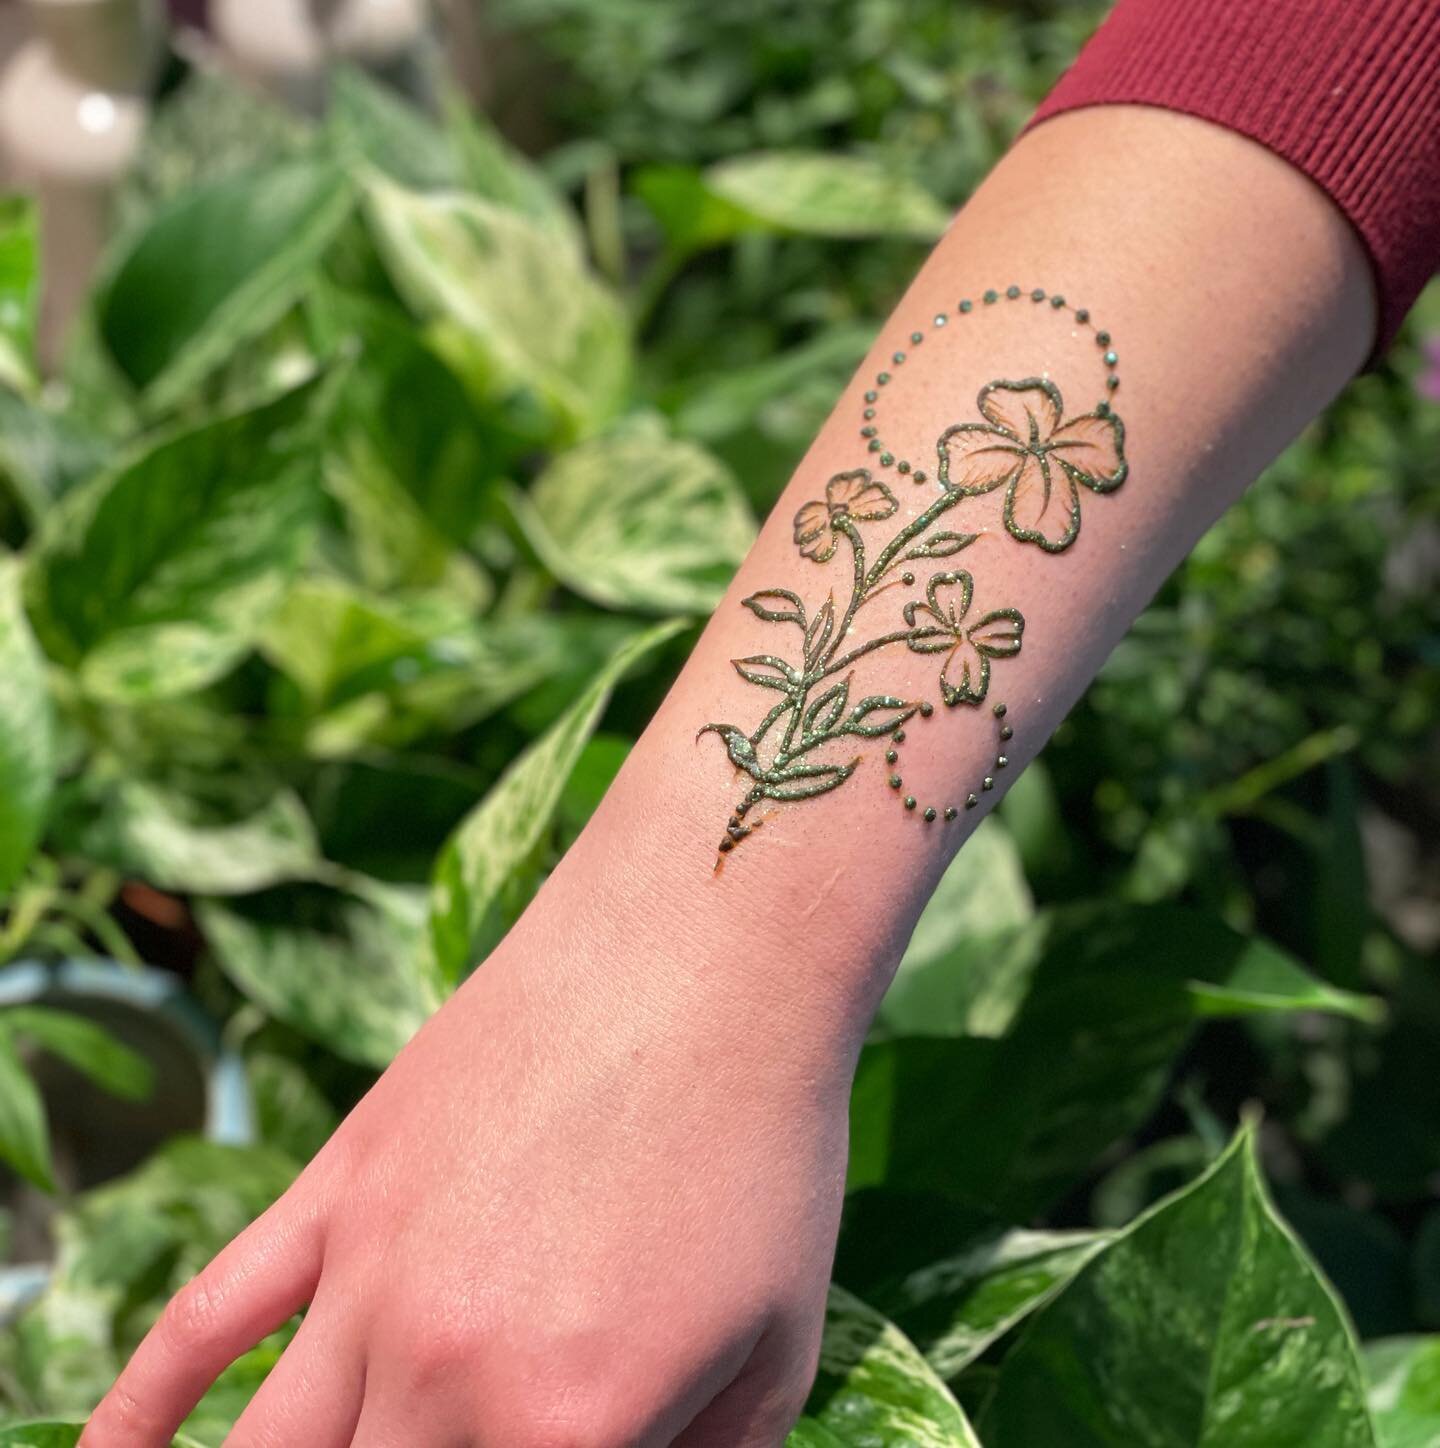 Tomorrow is the St Patrick&rsquo;s Day Parade in #downtownsiouxfalls and I&rsquo;ve got a couple of special pieces just for the event! Stop in for St Pattys Day themed henna and free glitter all day Friday and Saturday! 

#dtsf #hennaharvest #hennabo